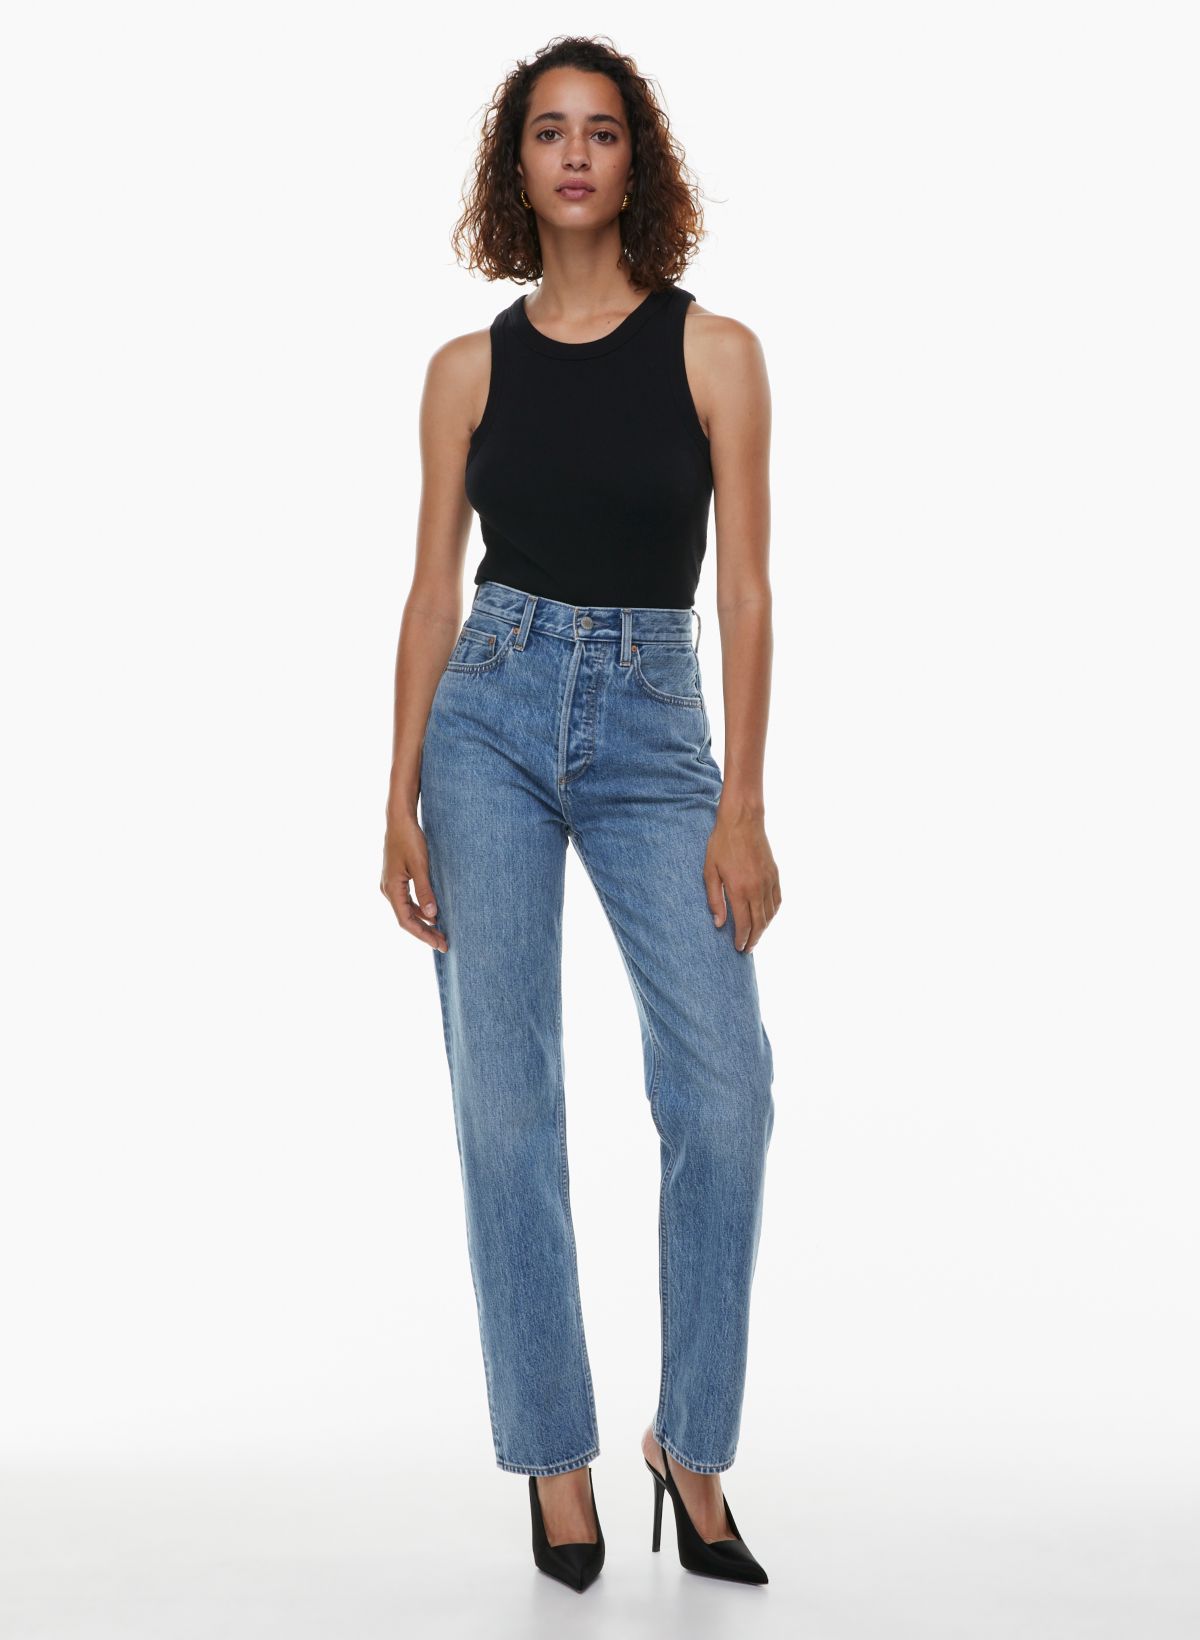 Move Over Skinny Jeans: Baggy Jeans Are On Trend - The Mom Edit